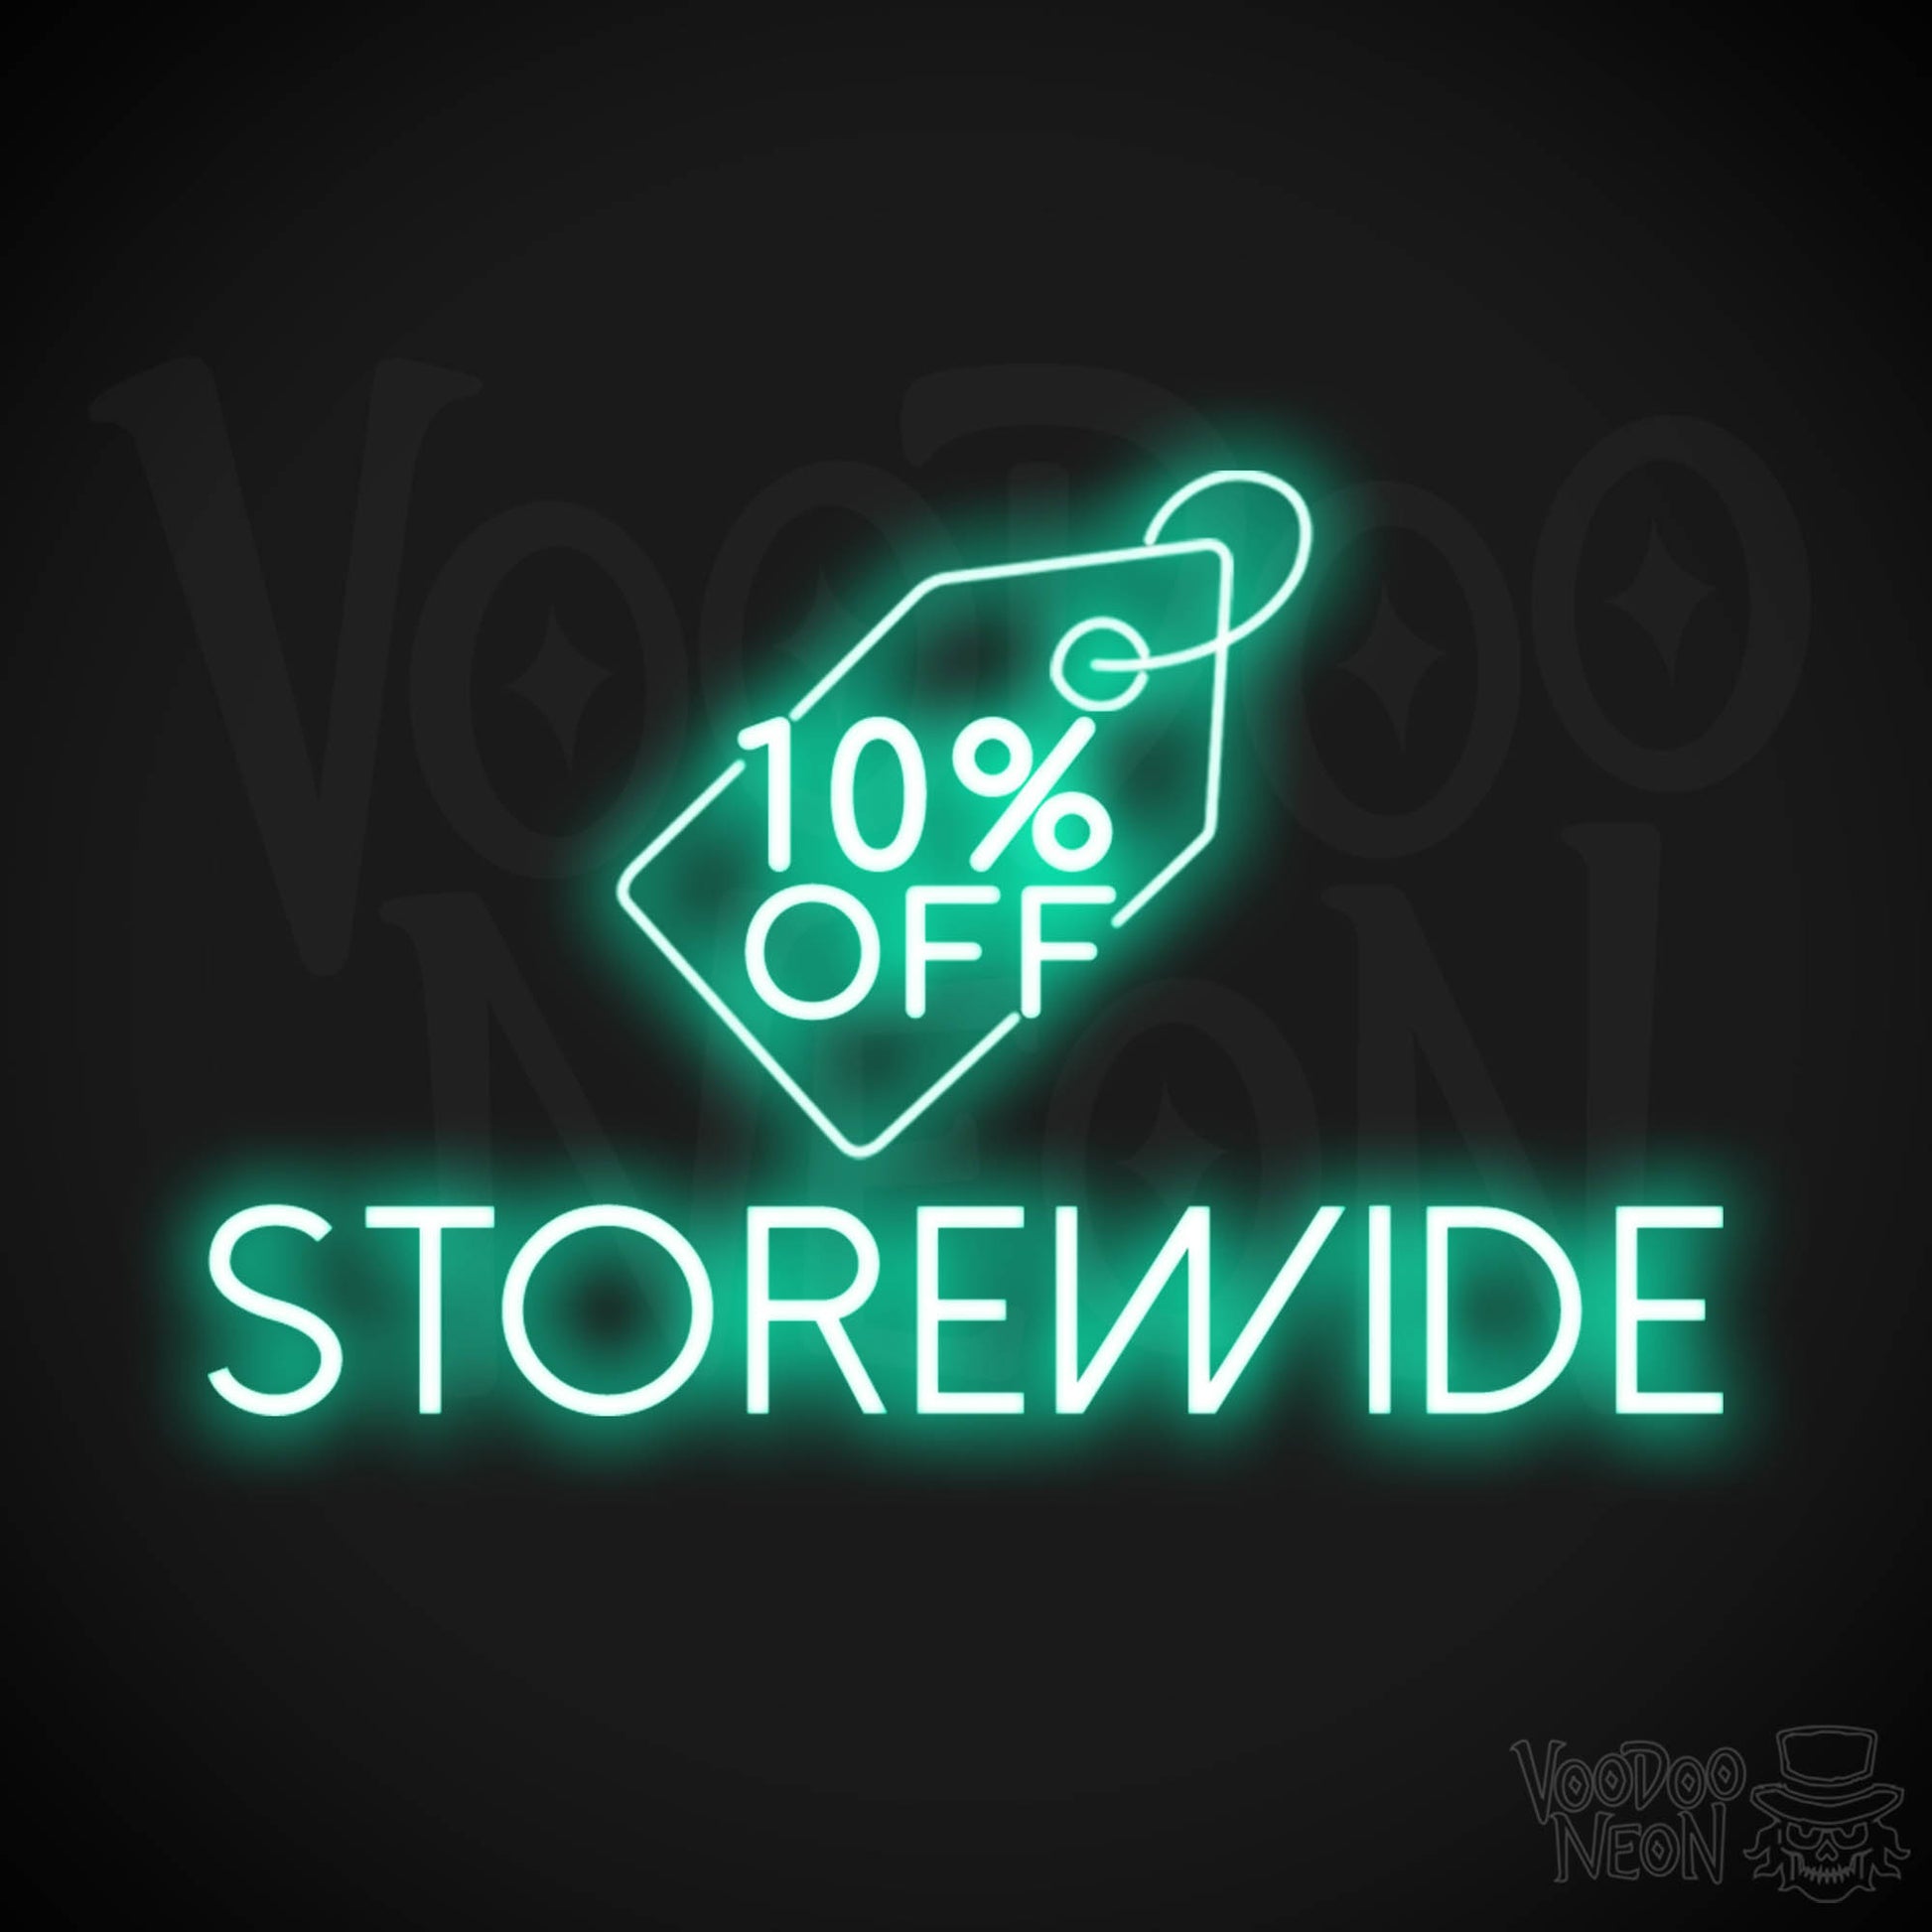 10% Off Storewide Neon Sign - 10% Off Storewide Sign - Neon Shop Signs - Color Light Green